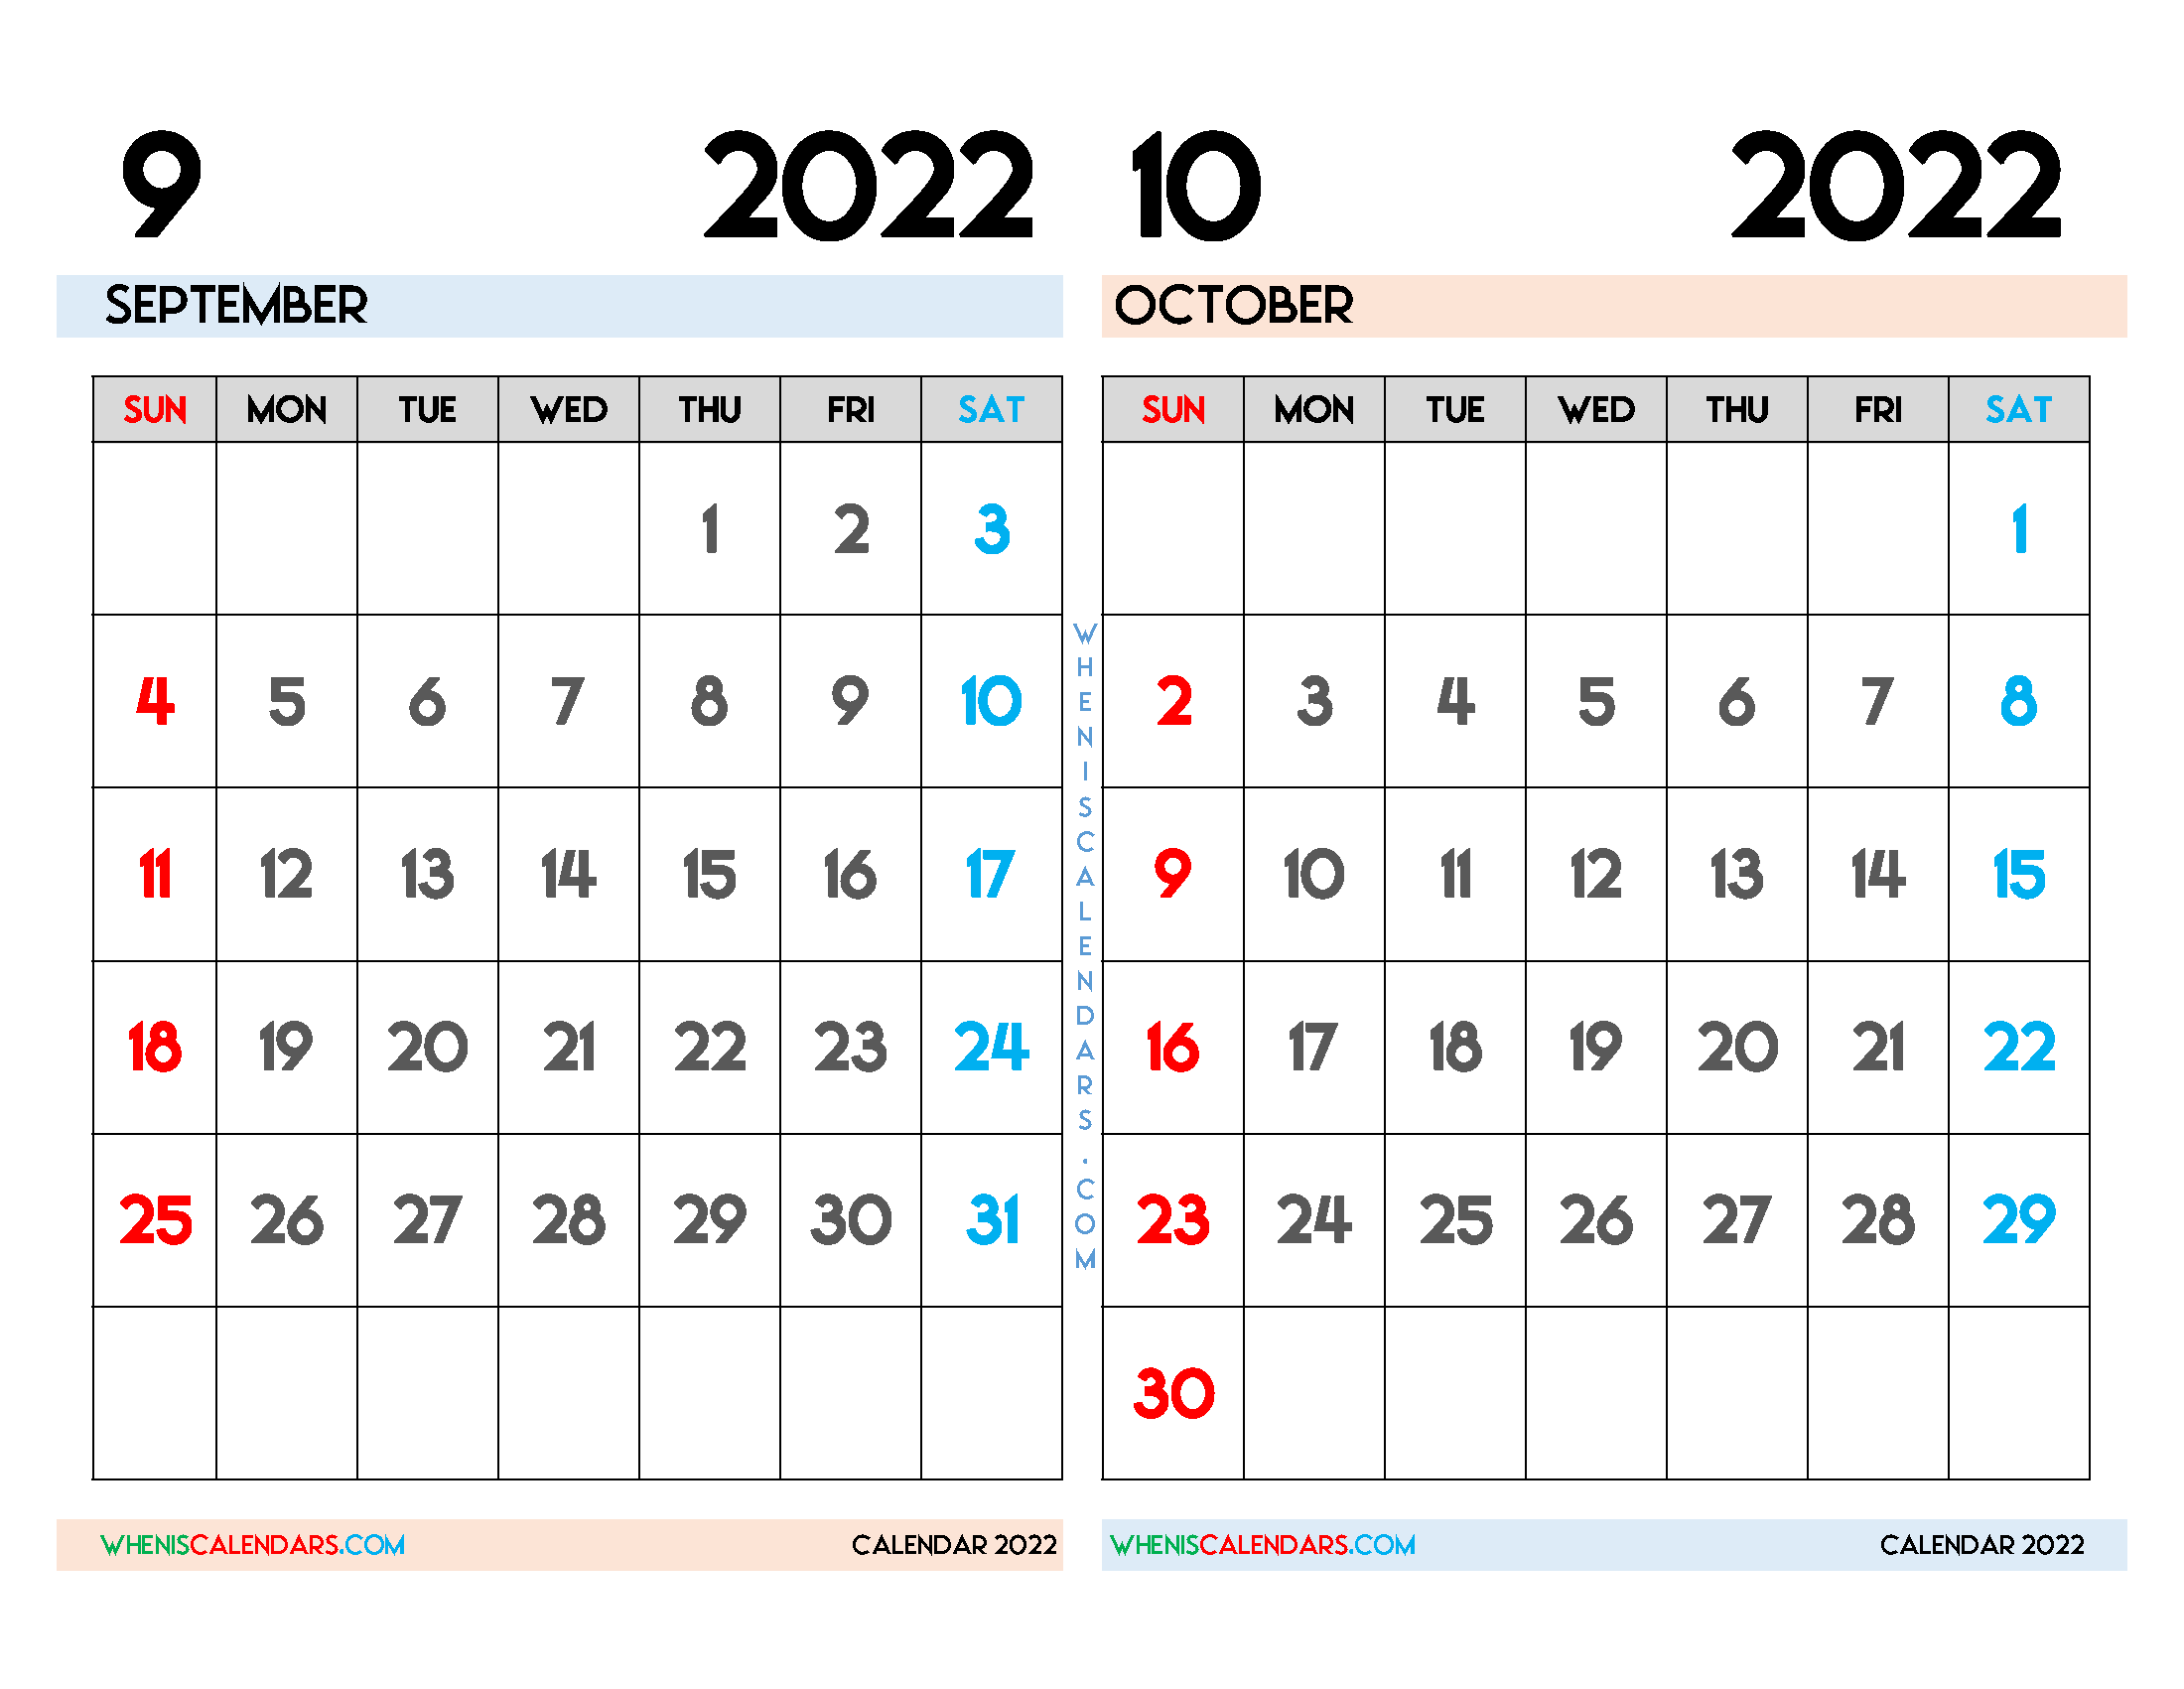 Download Free September and October 2022 Calendar Printable as PDF document and high resolution Image